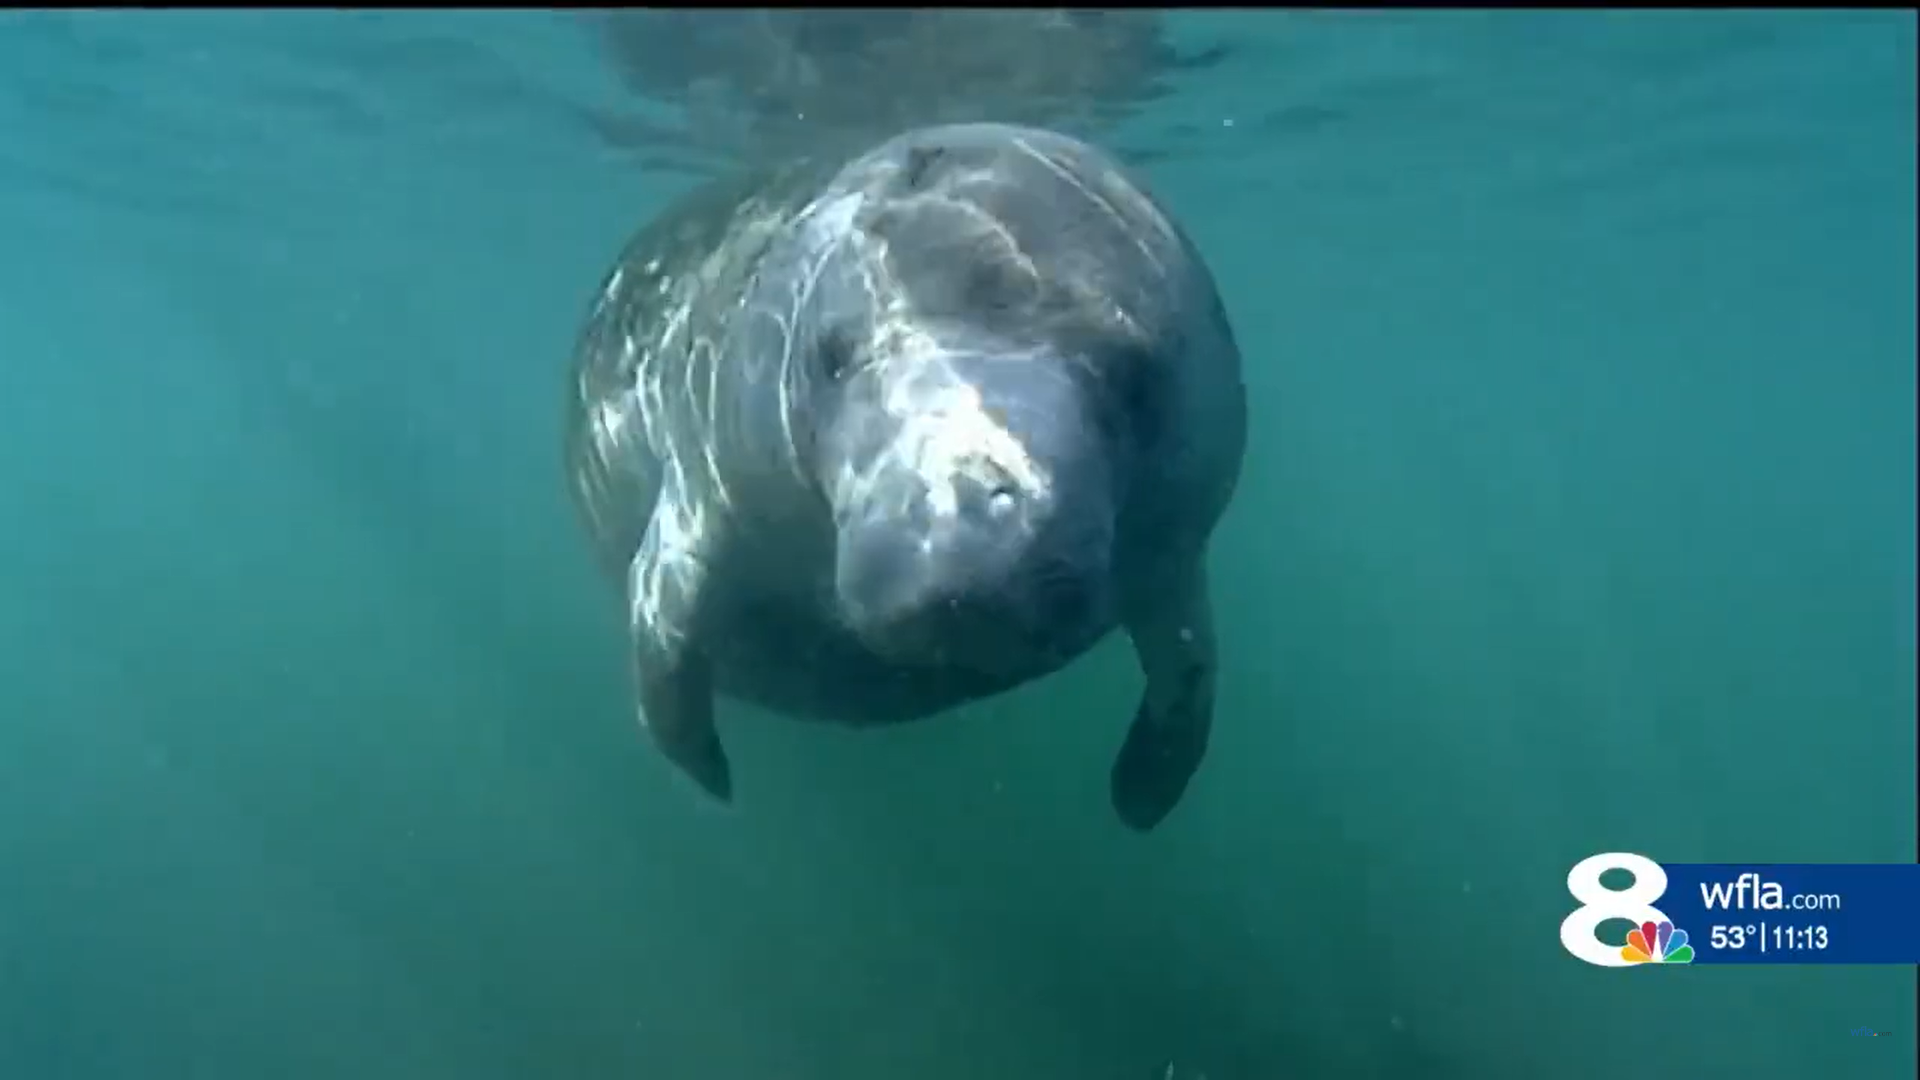 Florida wildlife officials plan to feed wild manatees for second year